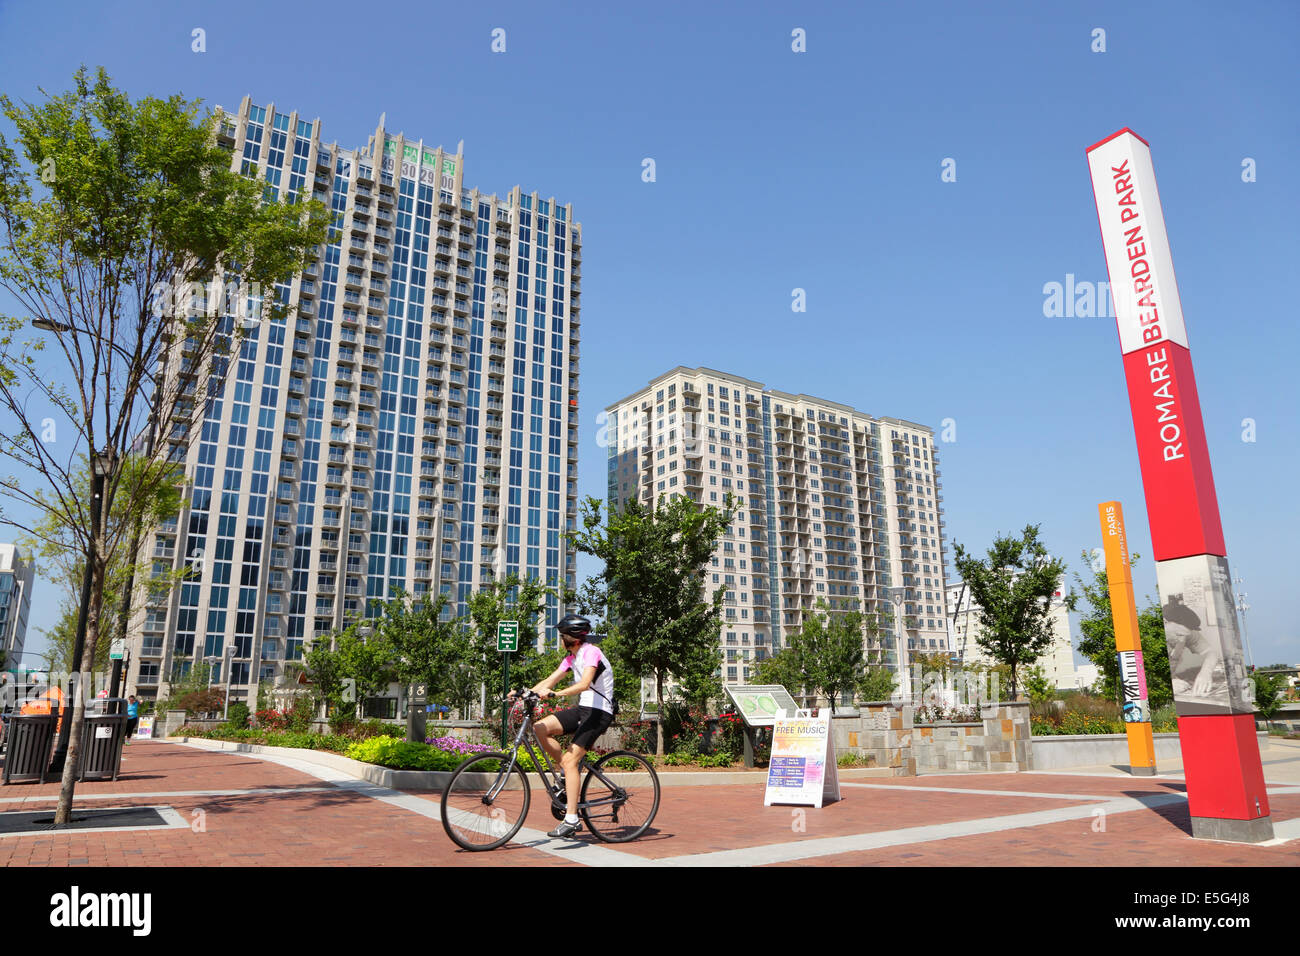 Romare Bearden Park, with residential towers in background, Charlotte, North Carolina, USA Stock Photo